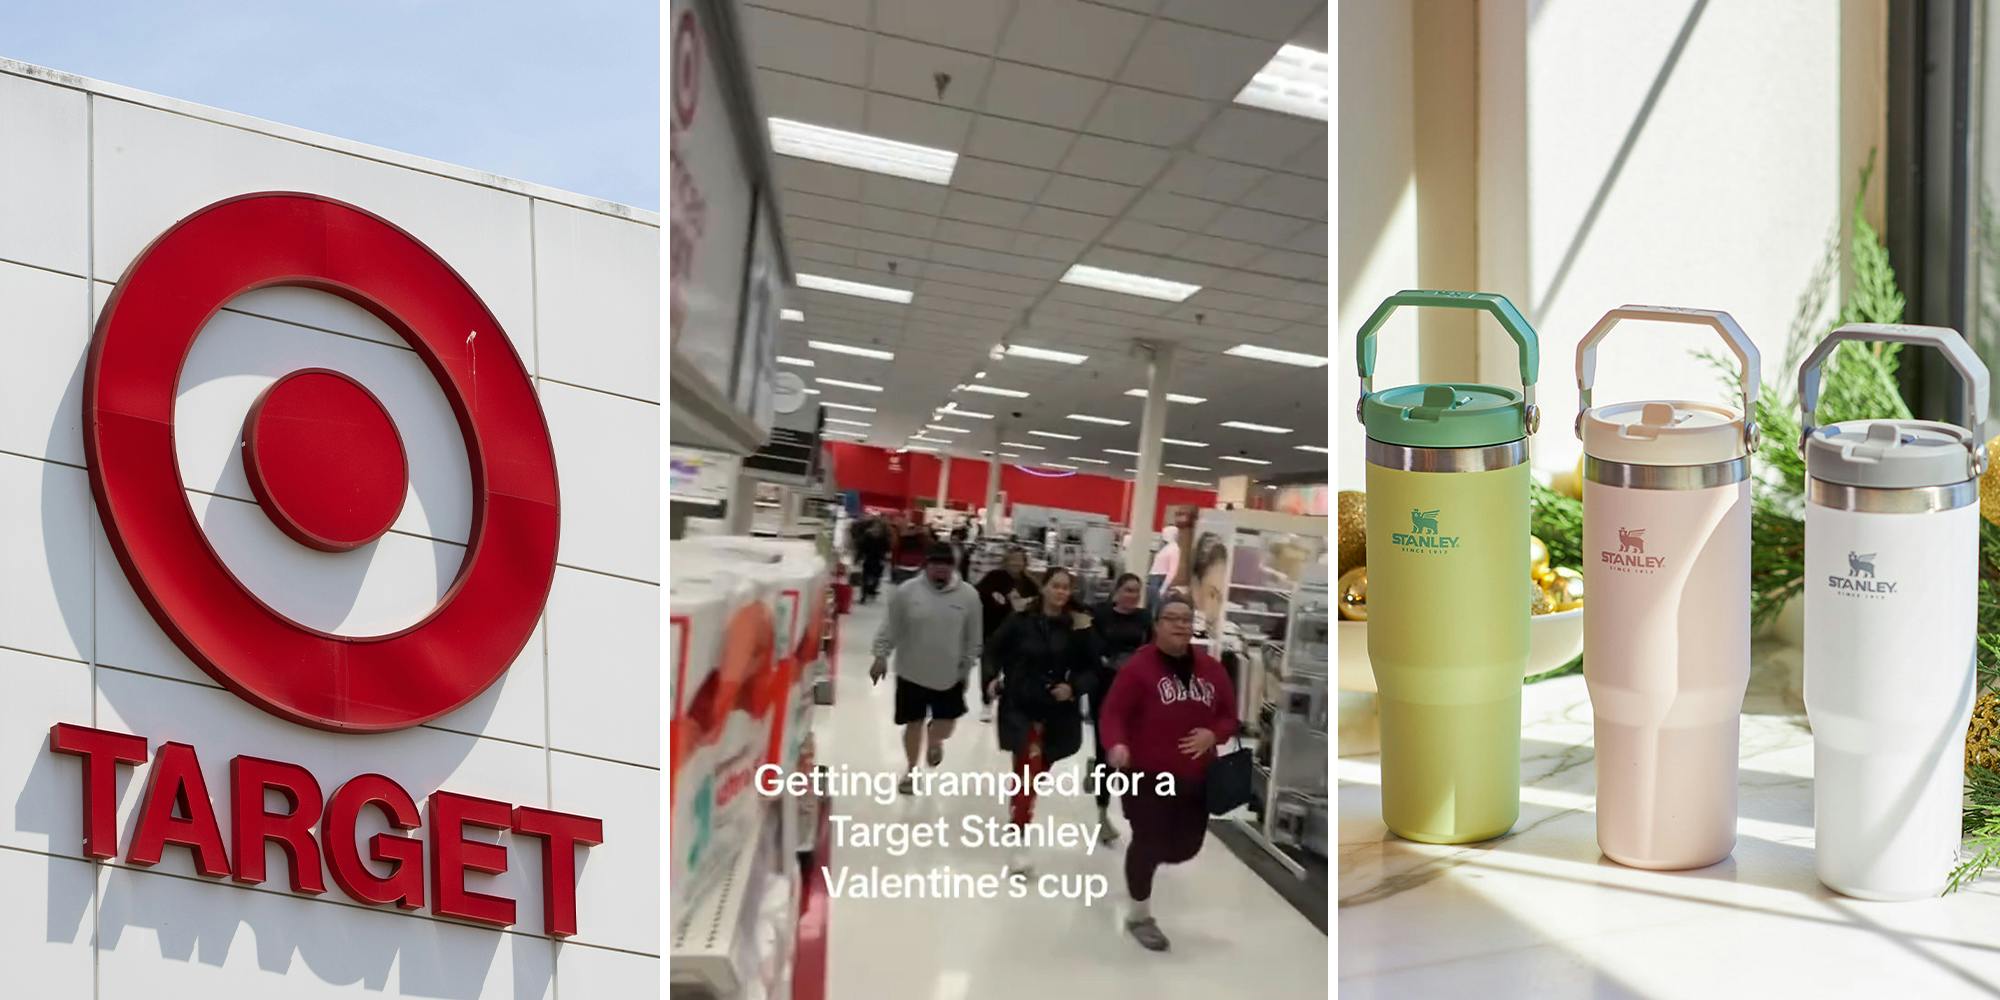 Target Shopper Was Trampled By Customers Get Stanley Cups